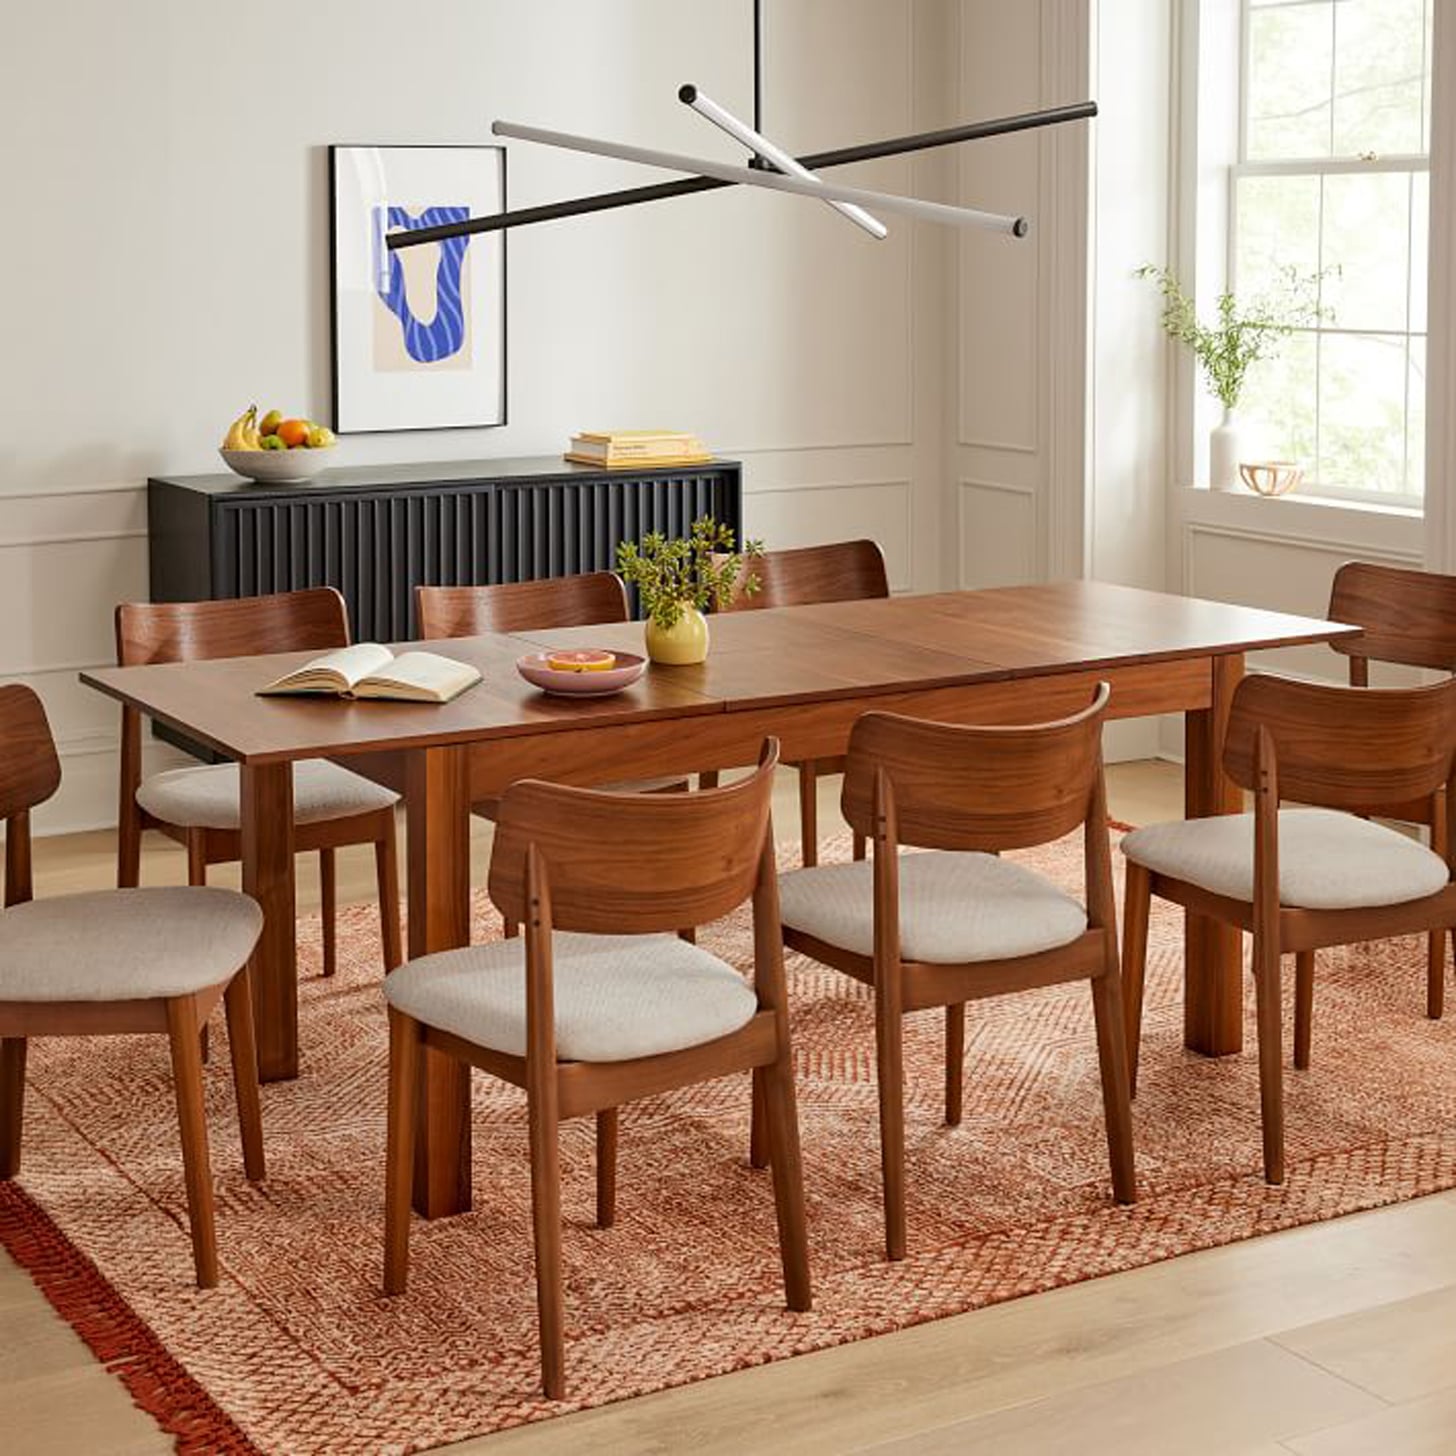 Unreadable drag Clinic Best Dining Room Tables From West Elm | POPSUGAR Home